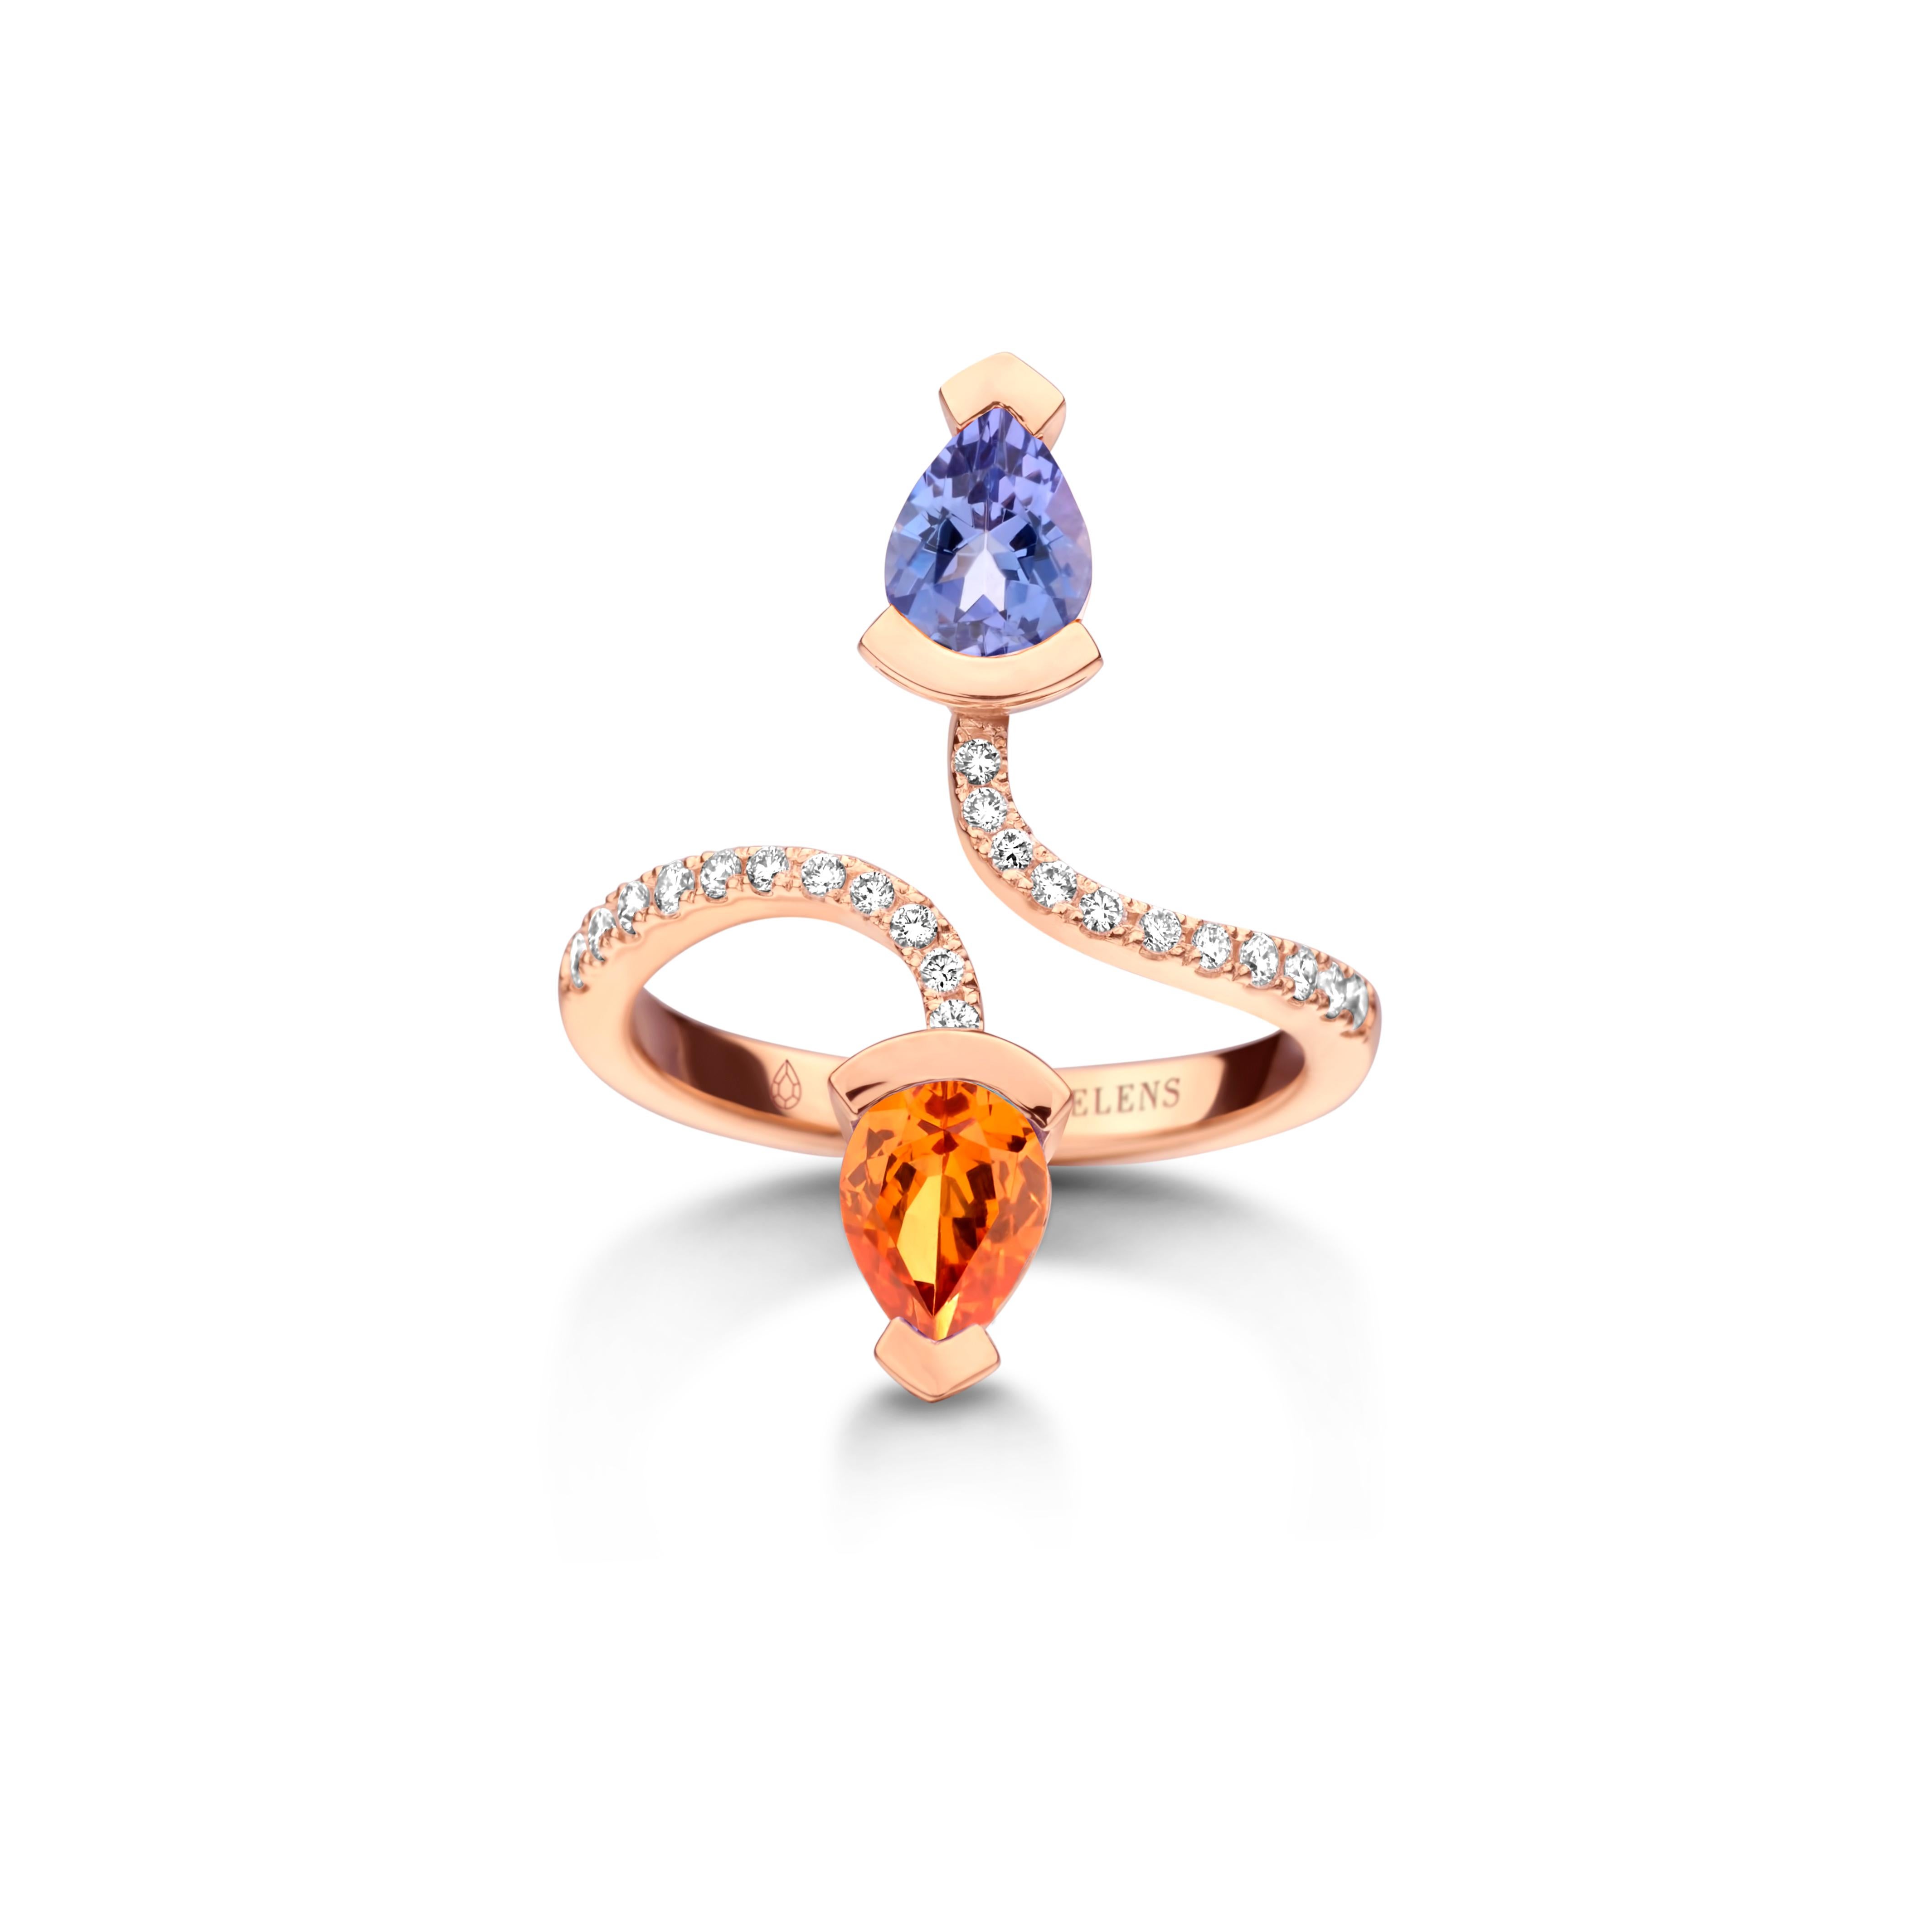 Adeline Duo ring in 18Kt white gold 5g set with a pear-shaped Tanzanite 0,70 Ct, a pear-shaped mandarin garnet 0,70 Ct and 0,19 Ct of white brilliant cut diamonds - VS F quality. Celine Roelens, a goldsmith and gemologist, is specialized in unique,